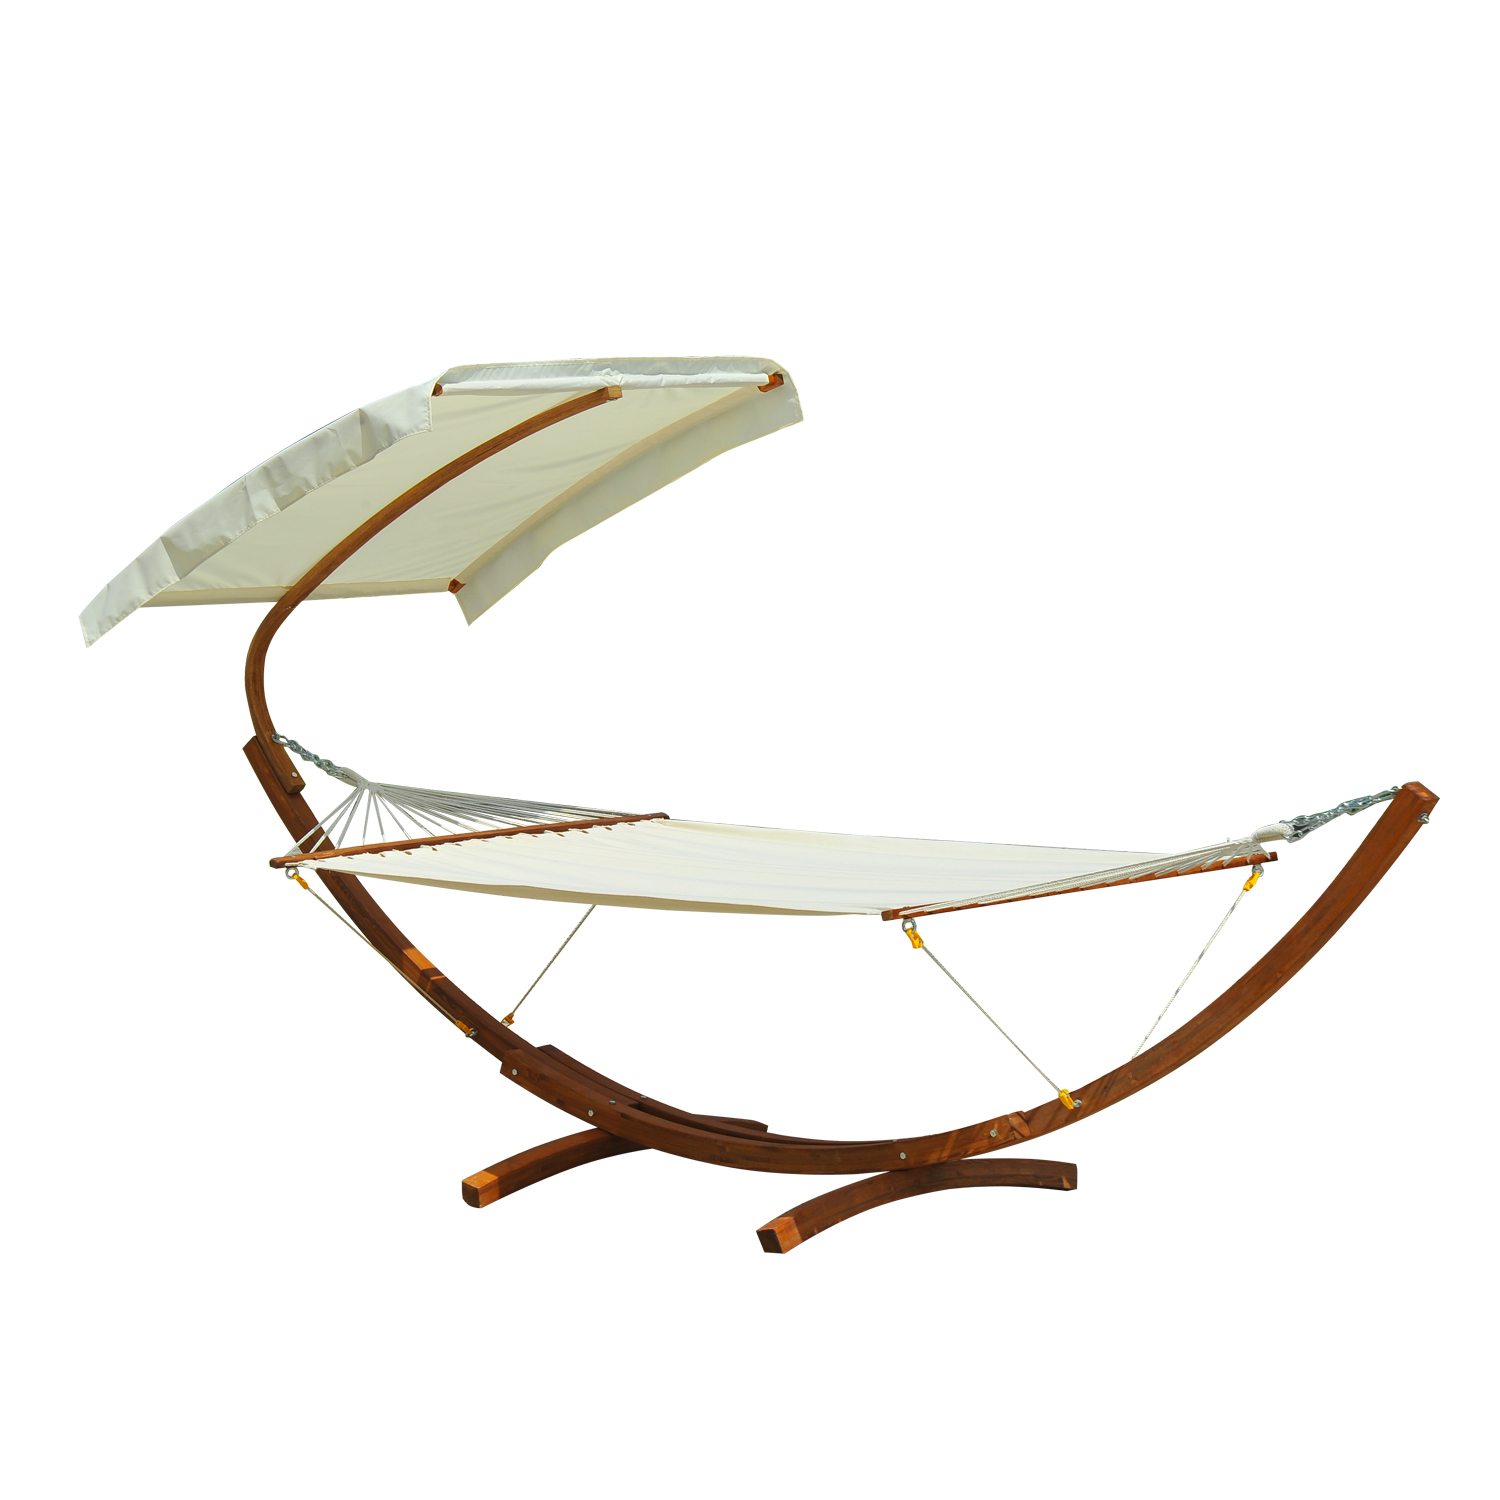 Outsunny Freestanding Hammock, Brown